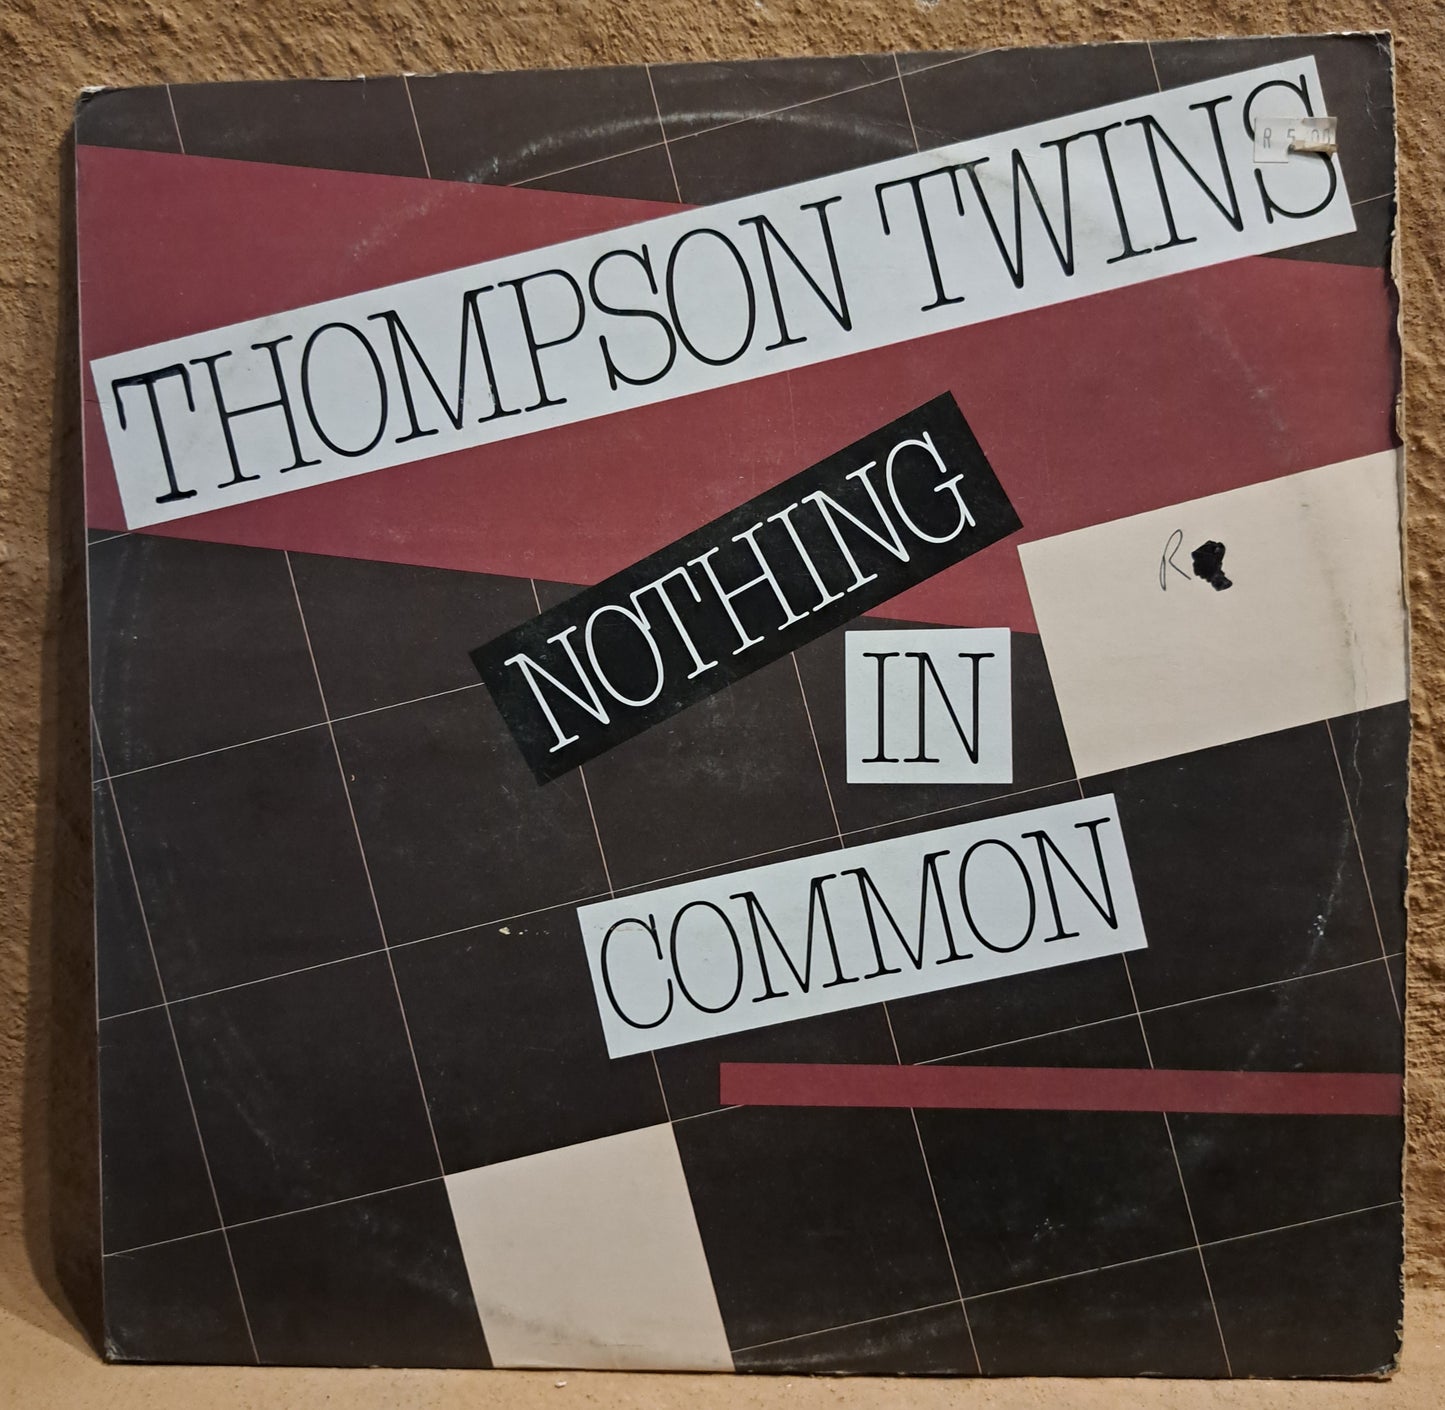 Thompson Twins - Nothing in common (12"maxi single)